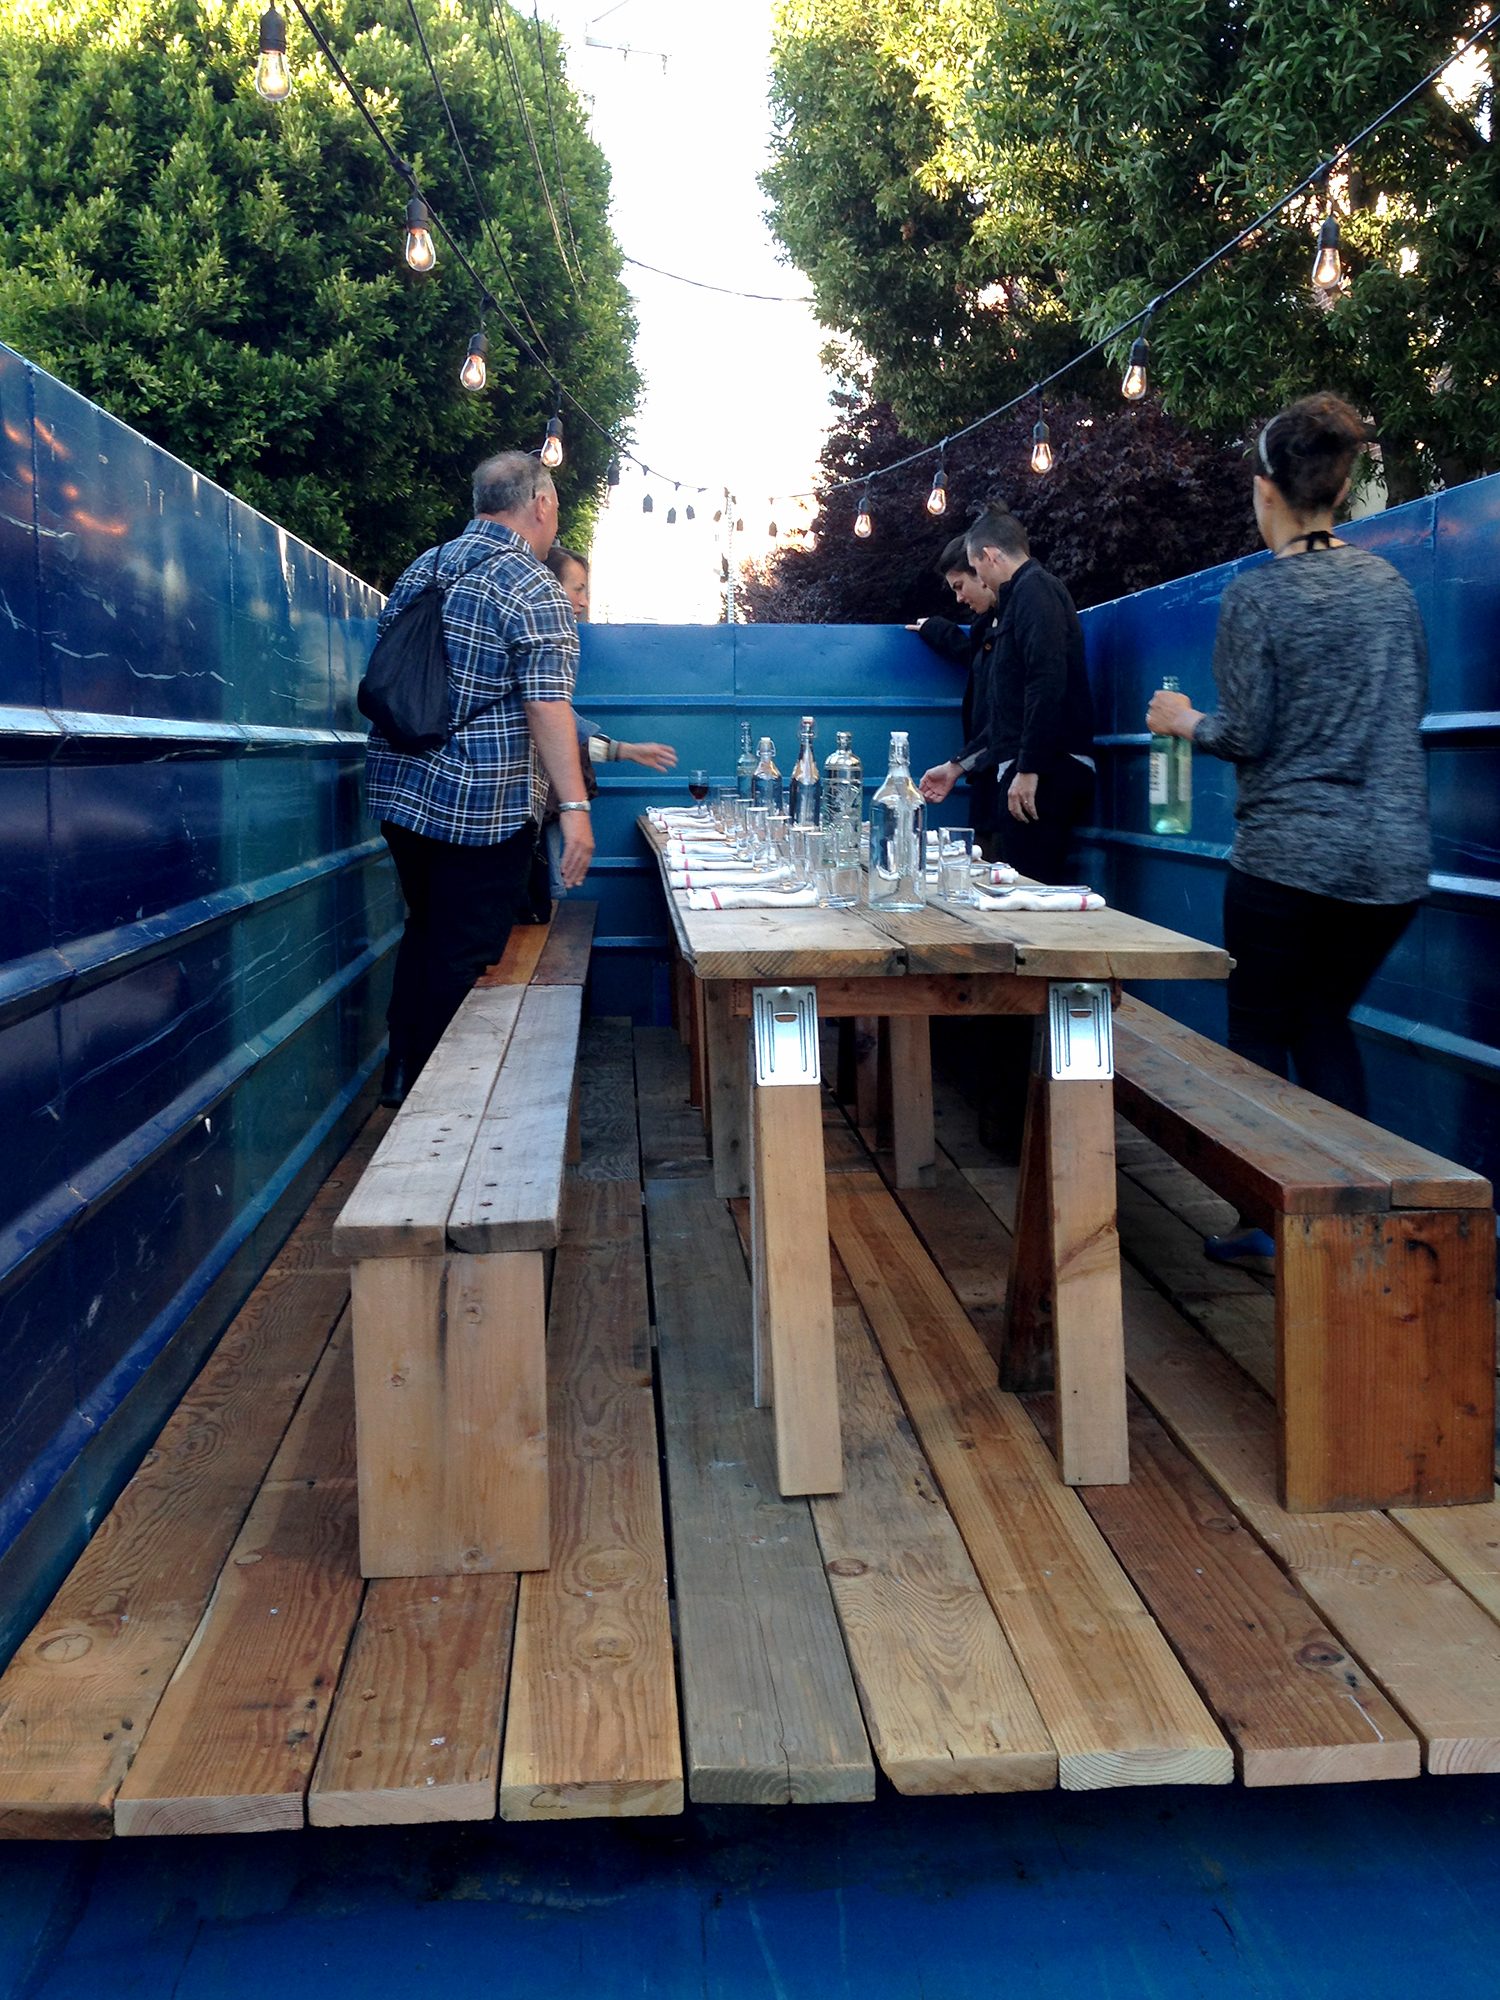 This San Francisco dumpster was decorated with glass tea lights, long wooden benches and bar towel napkins for the Salvage Supperclub dinner.